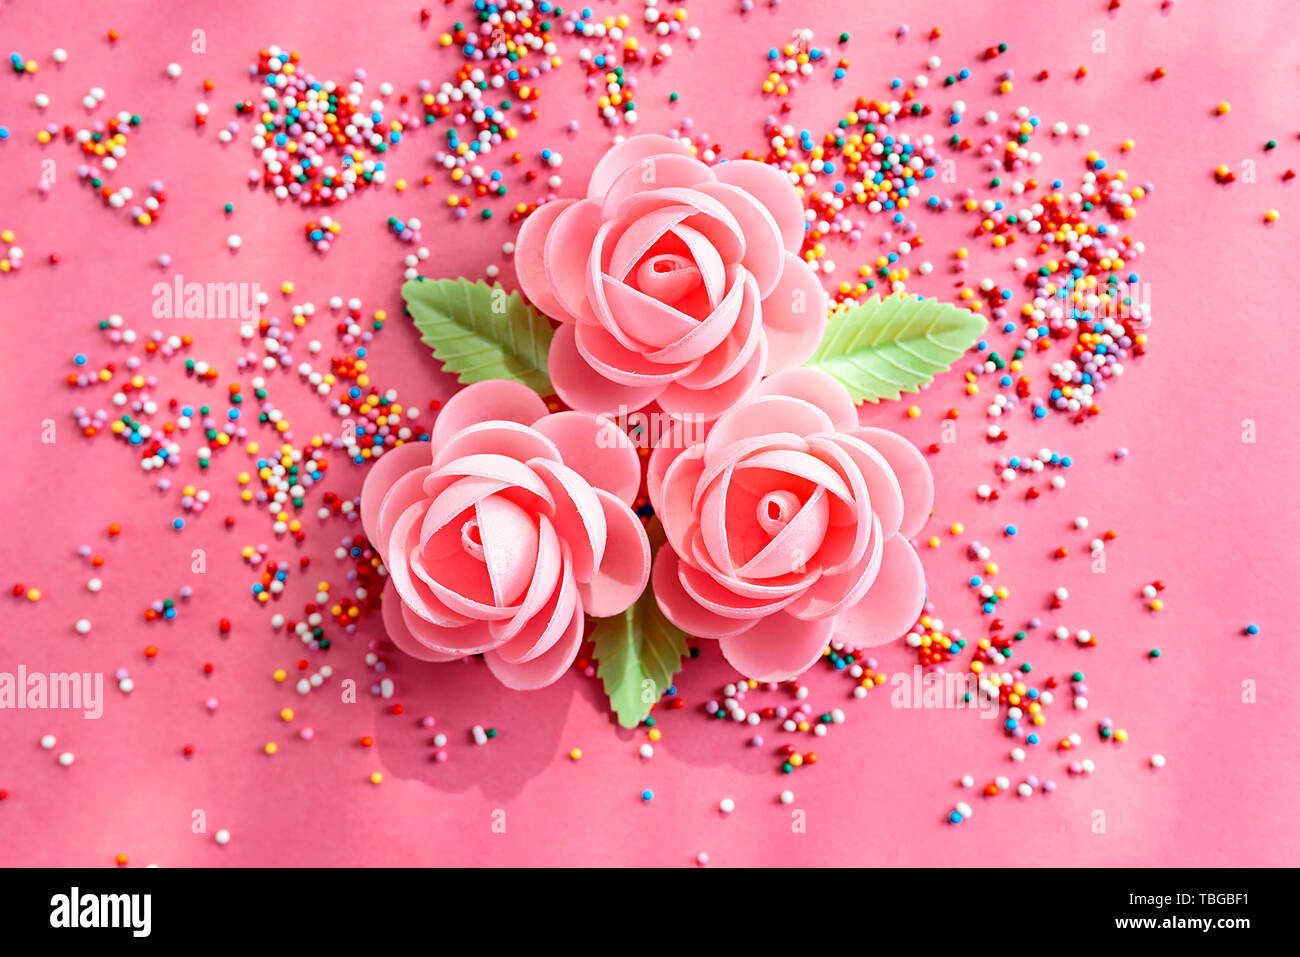 Arrangement of flowers and confetti to decorate sweet pastries. Top viewe, flat lay Stock Photo